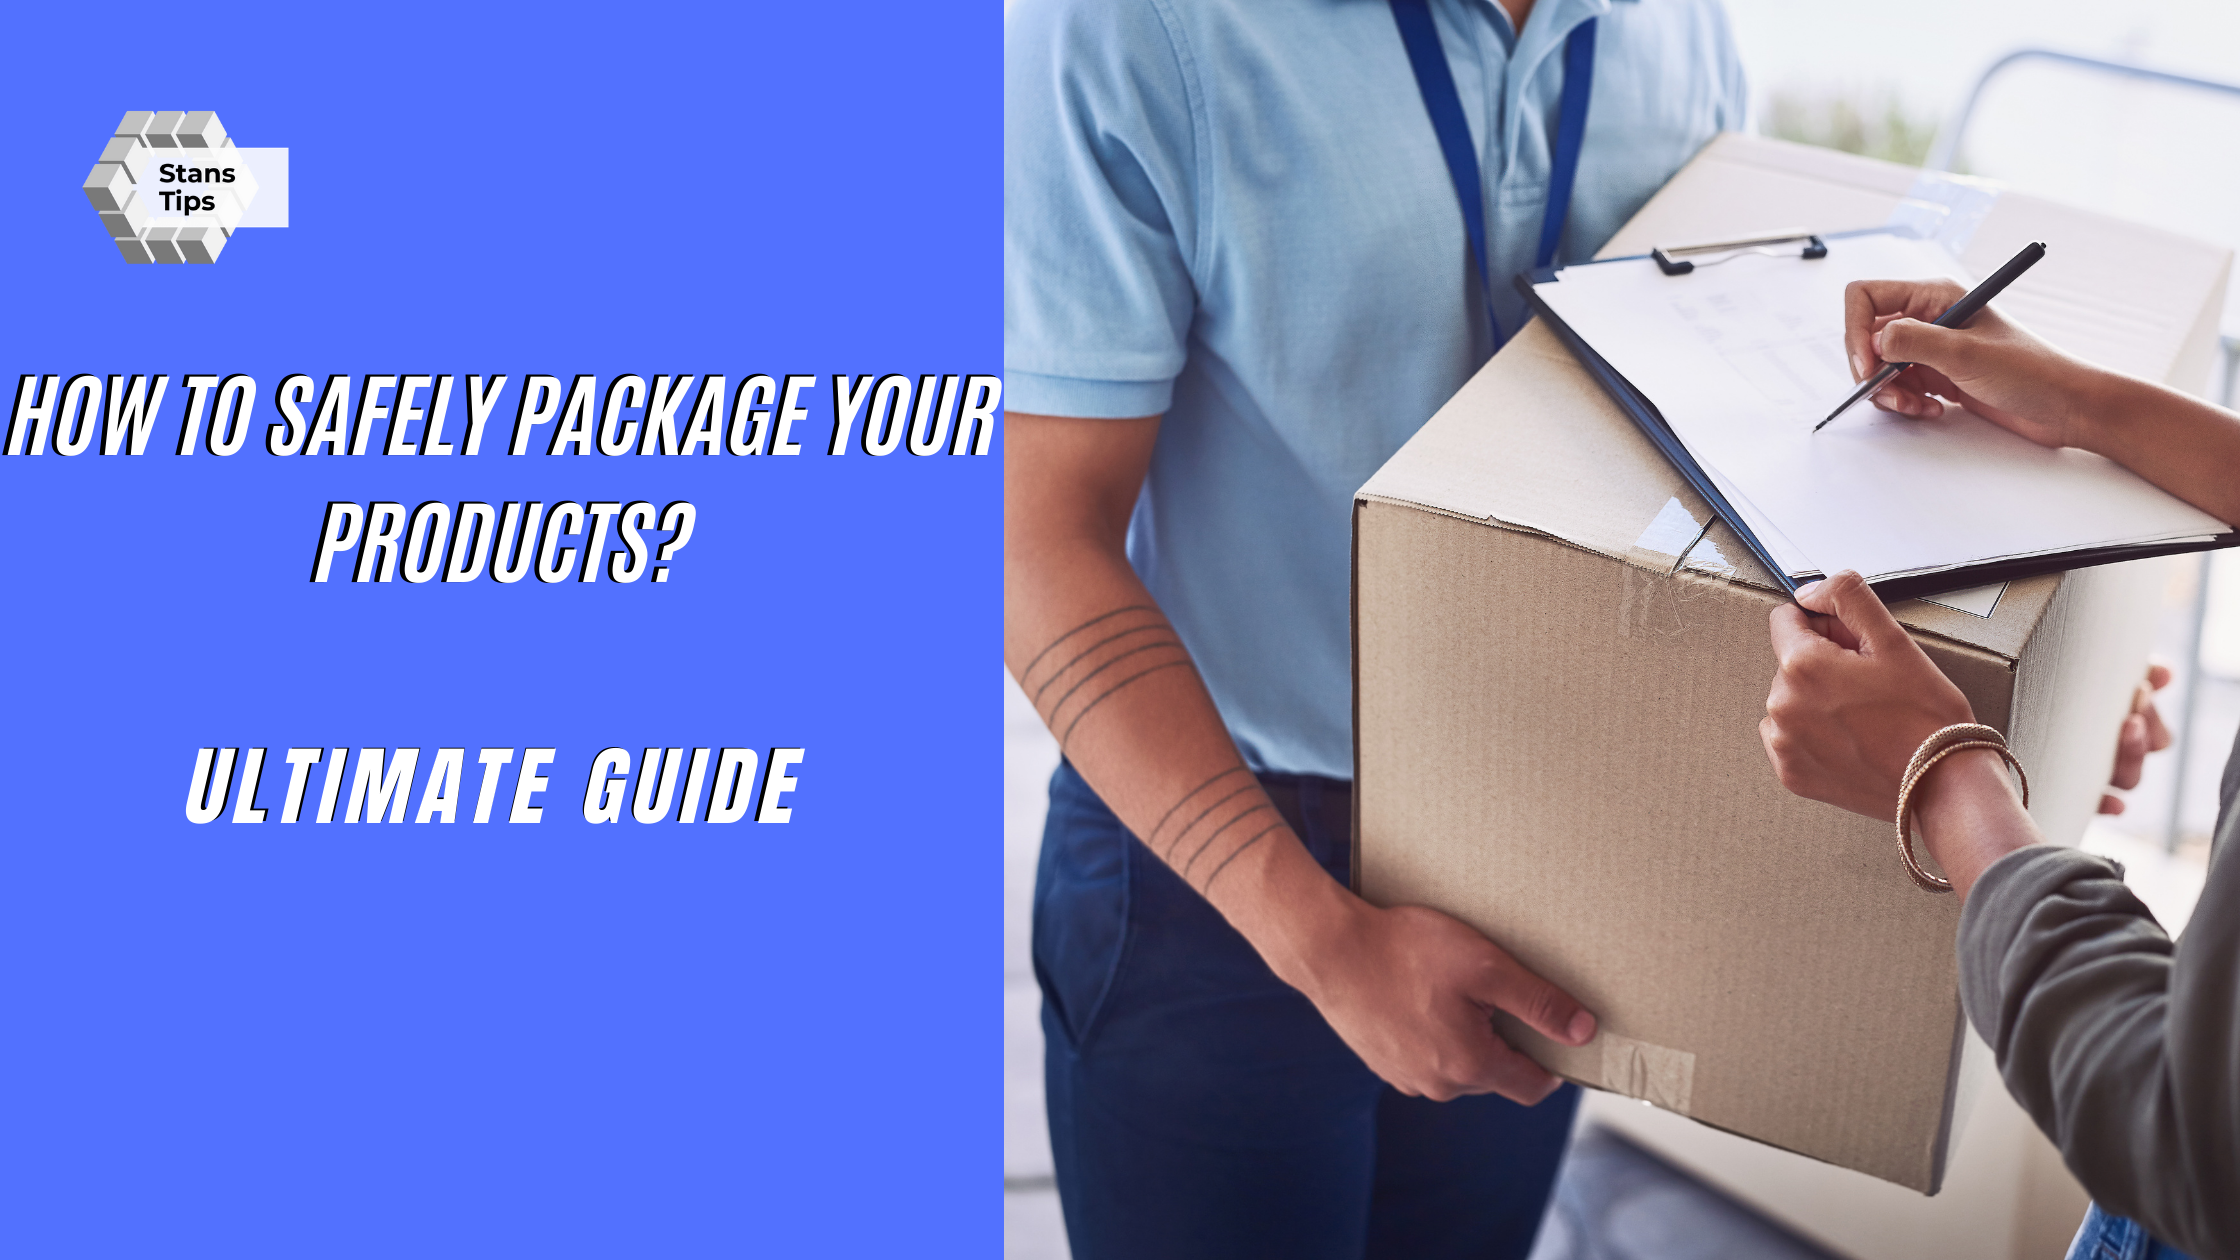 How to safely package your products